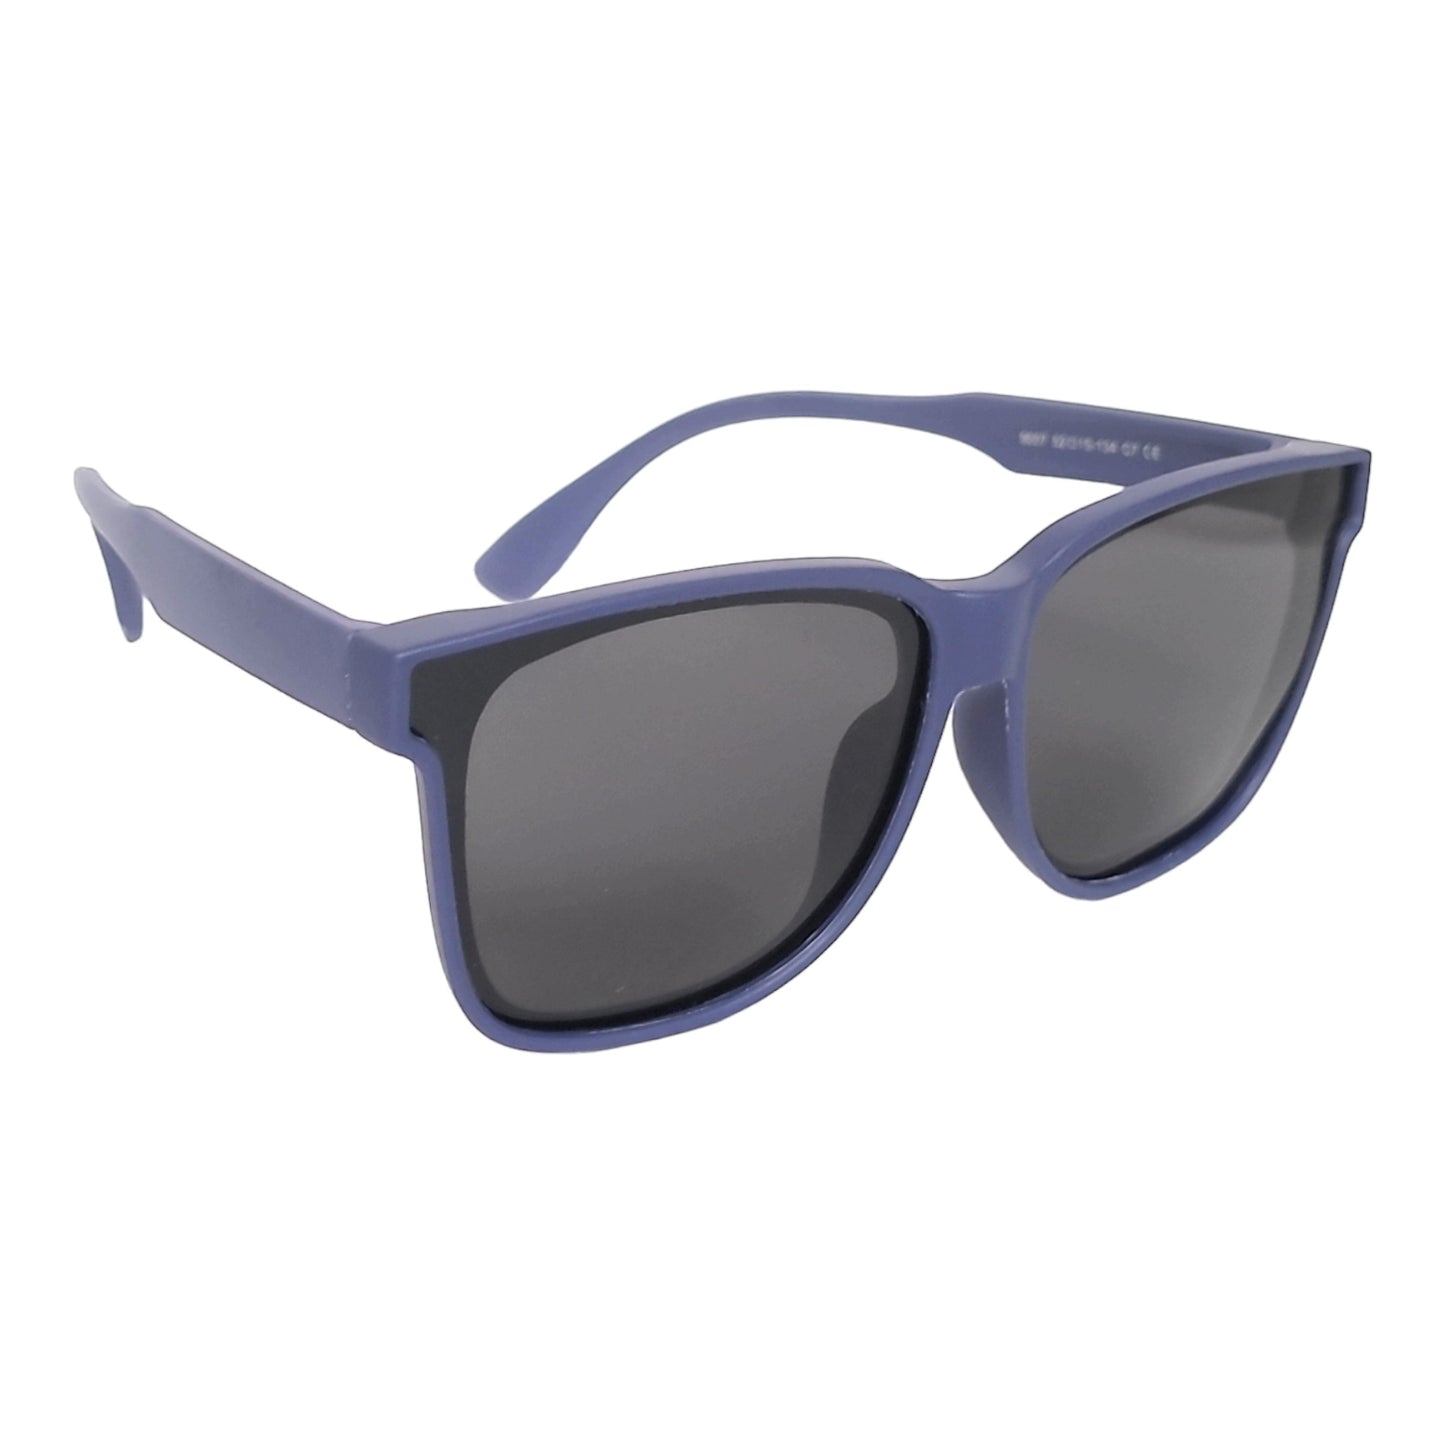 Kids Polarized Sunglasses for Children Age 4-9 Years Old, Girl or Boy  | affaires-9007- Dark Blue